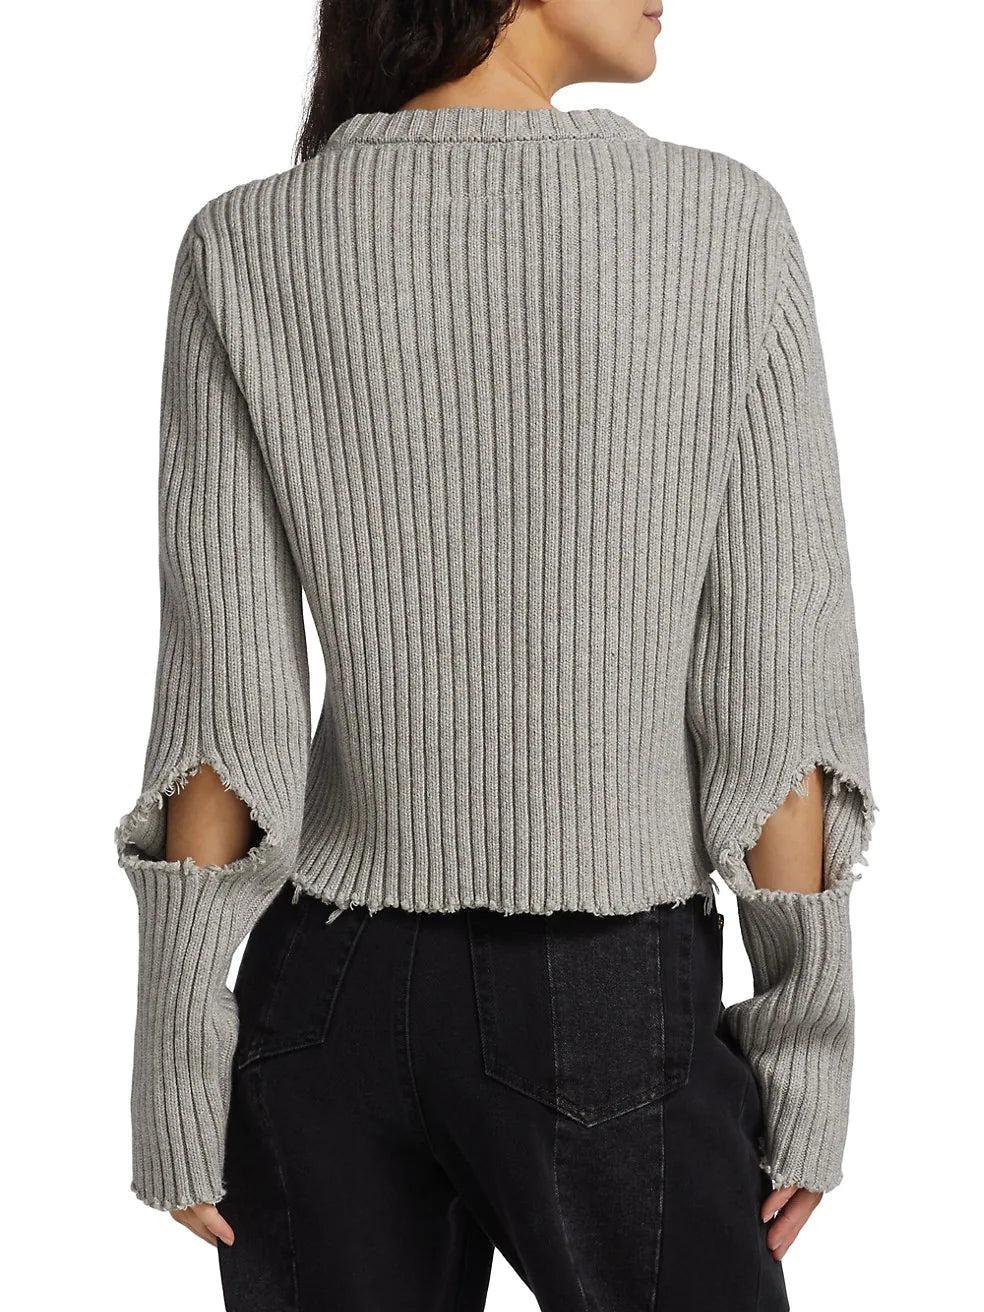 MM6 by Maison Martin Margiela Knit Sweater in White | Lyst